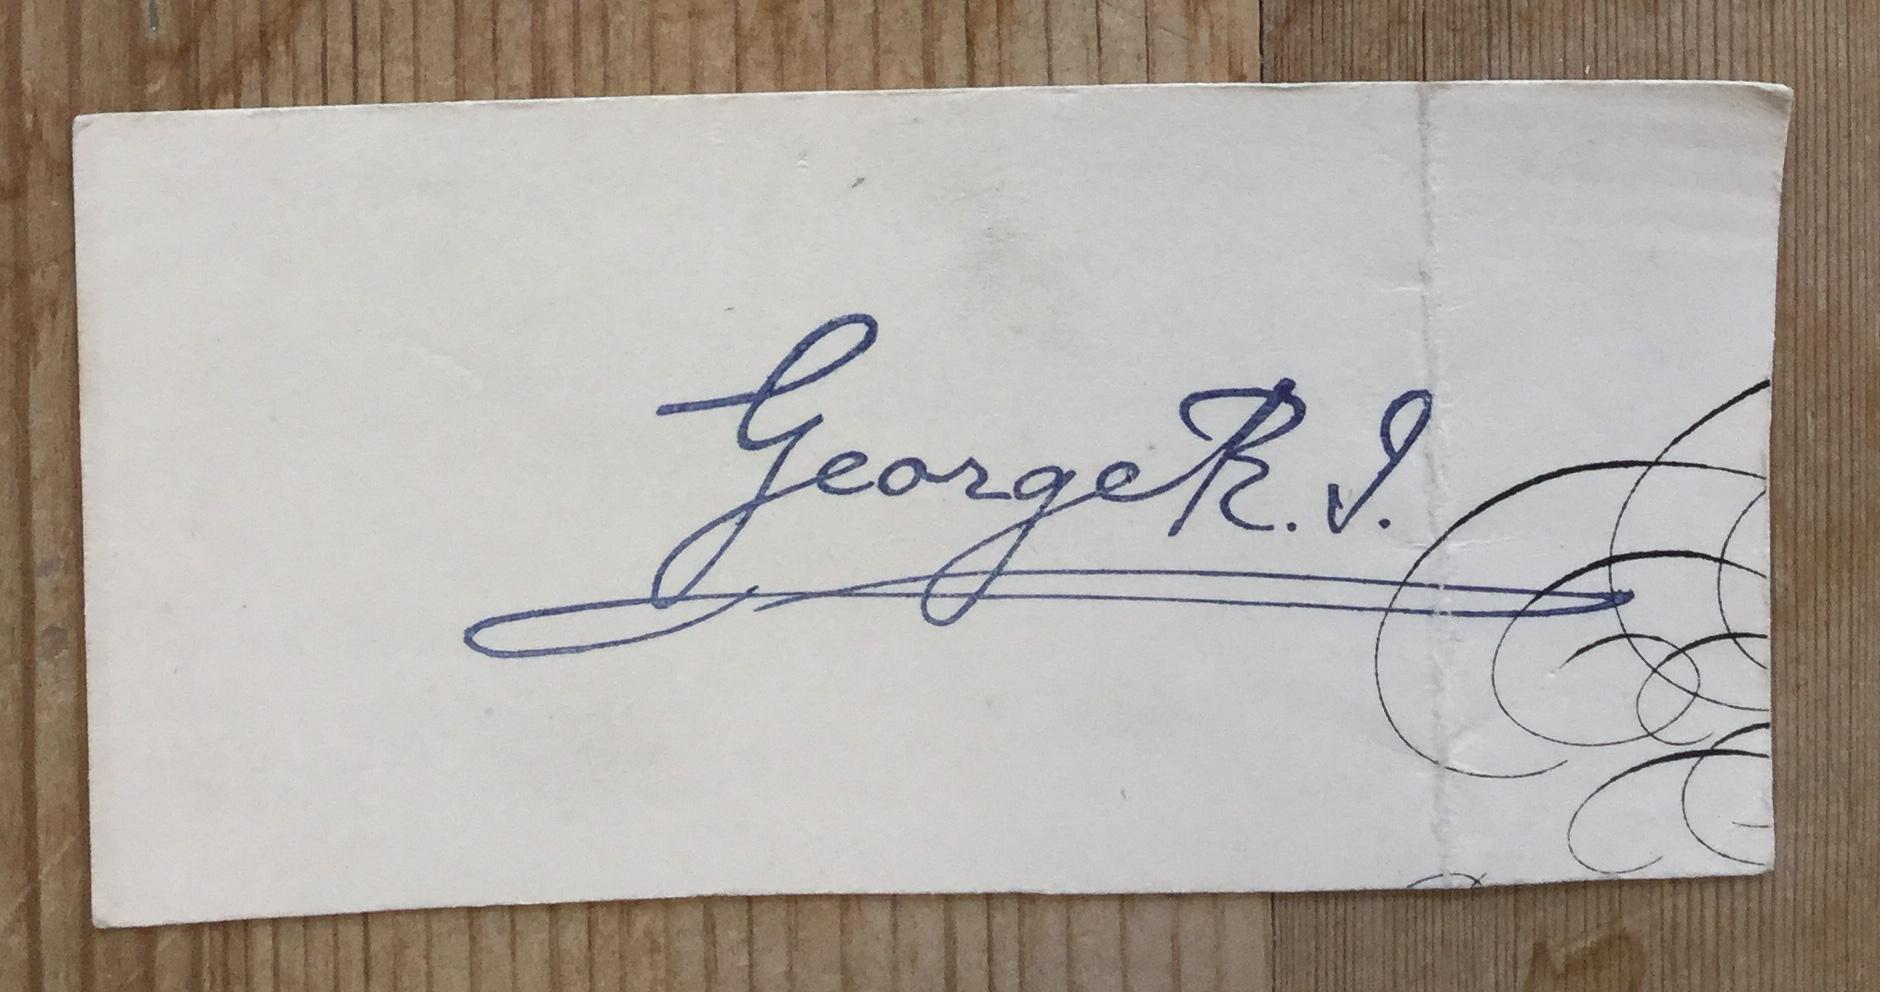 A handsome ink signature from British king George V (1865-1936).
King George III reigned from 1910 to 1936. 

The death of his elder brother, Albert, placed George unexpectedly first in line to the throne. 

A grandson of Queen Victoria, king George